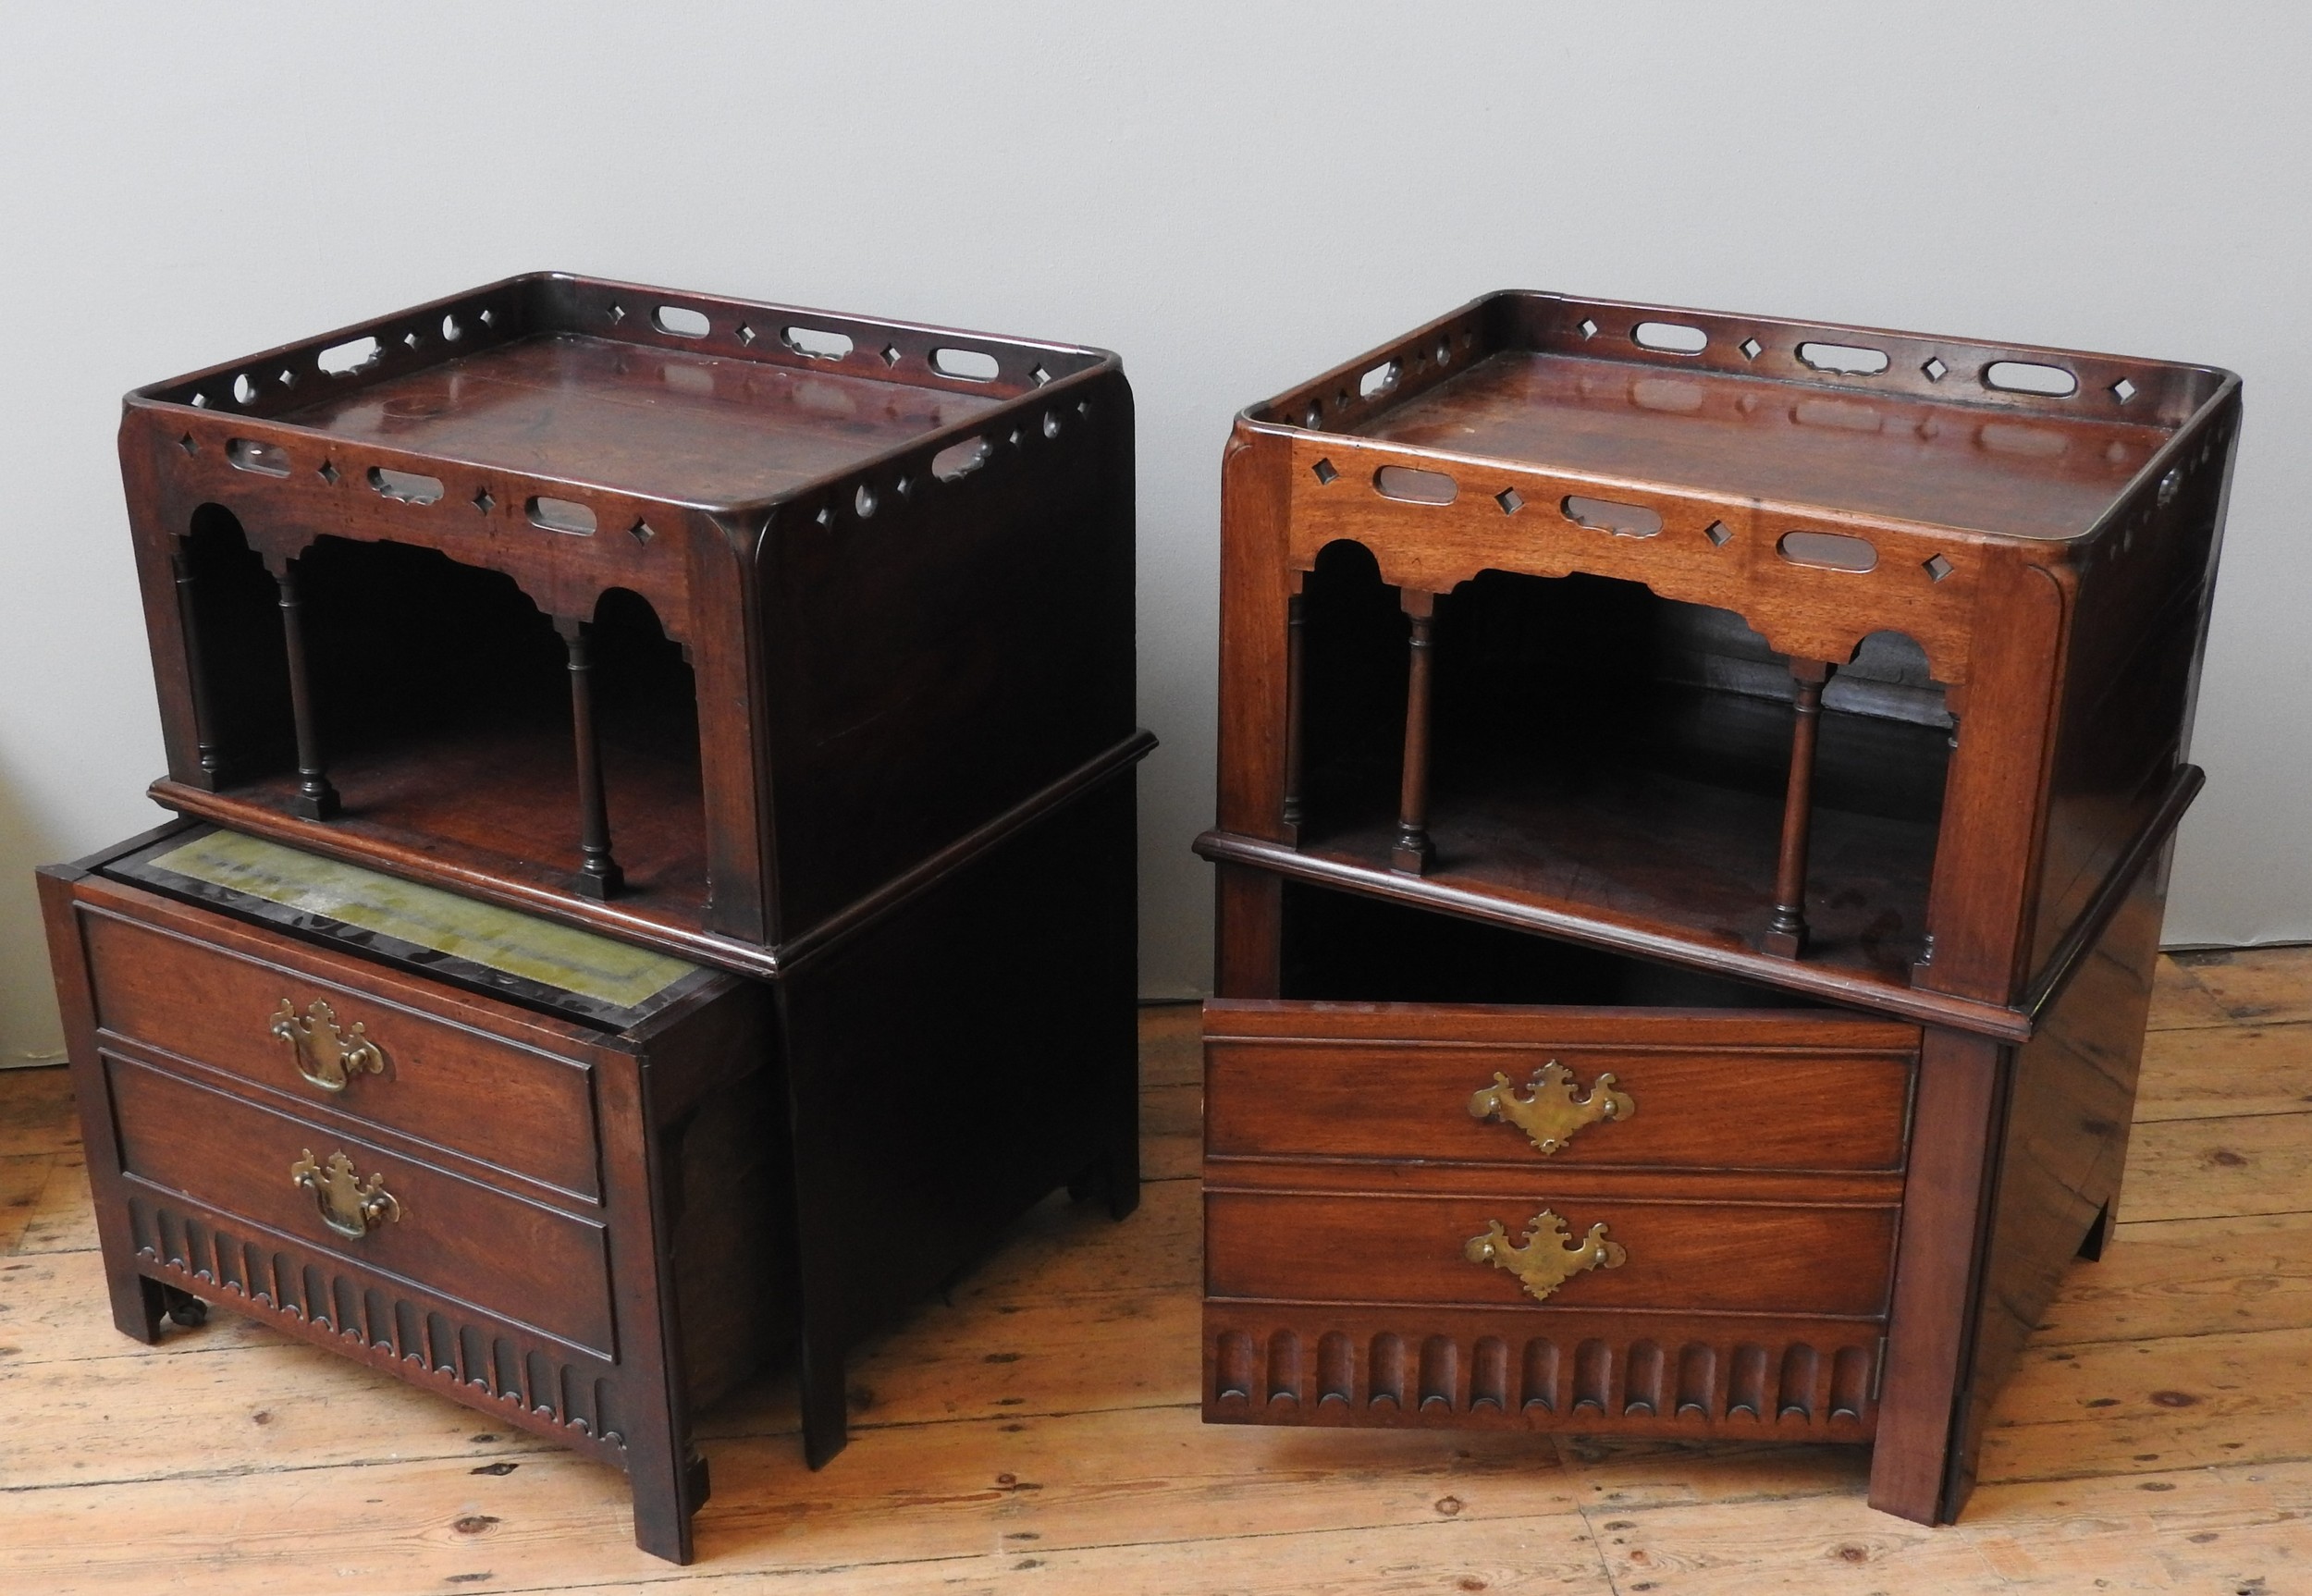 AN UNUSUAL NEAR PAIR OF GEORGE III MAHOGANY NIGHT COMMODES, CIRCA 1780, both adapted as bedside - Image 2 of 2